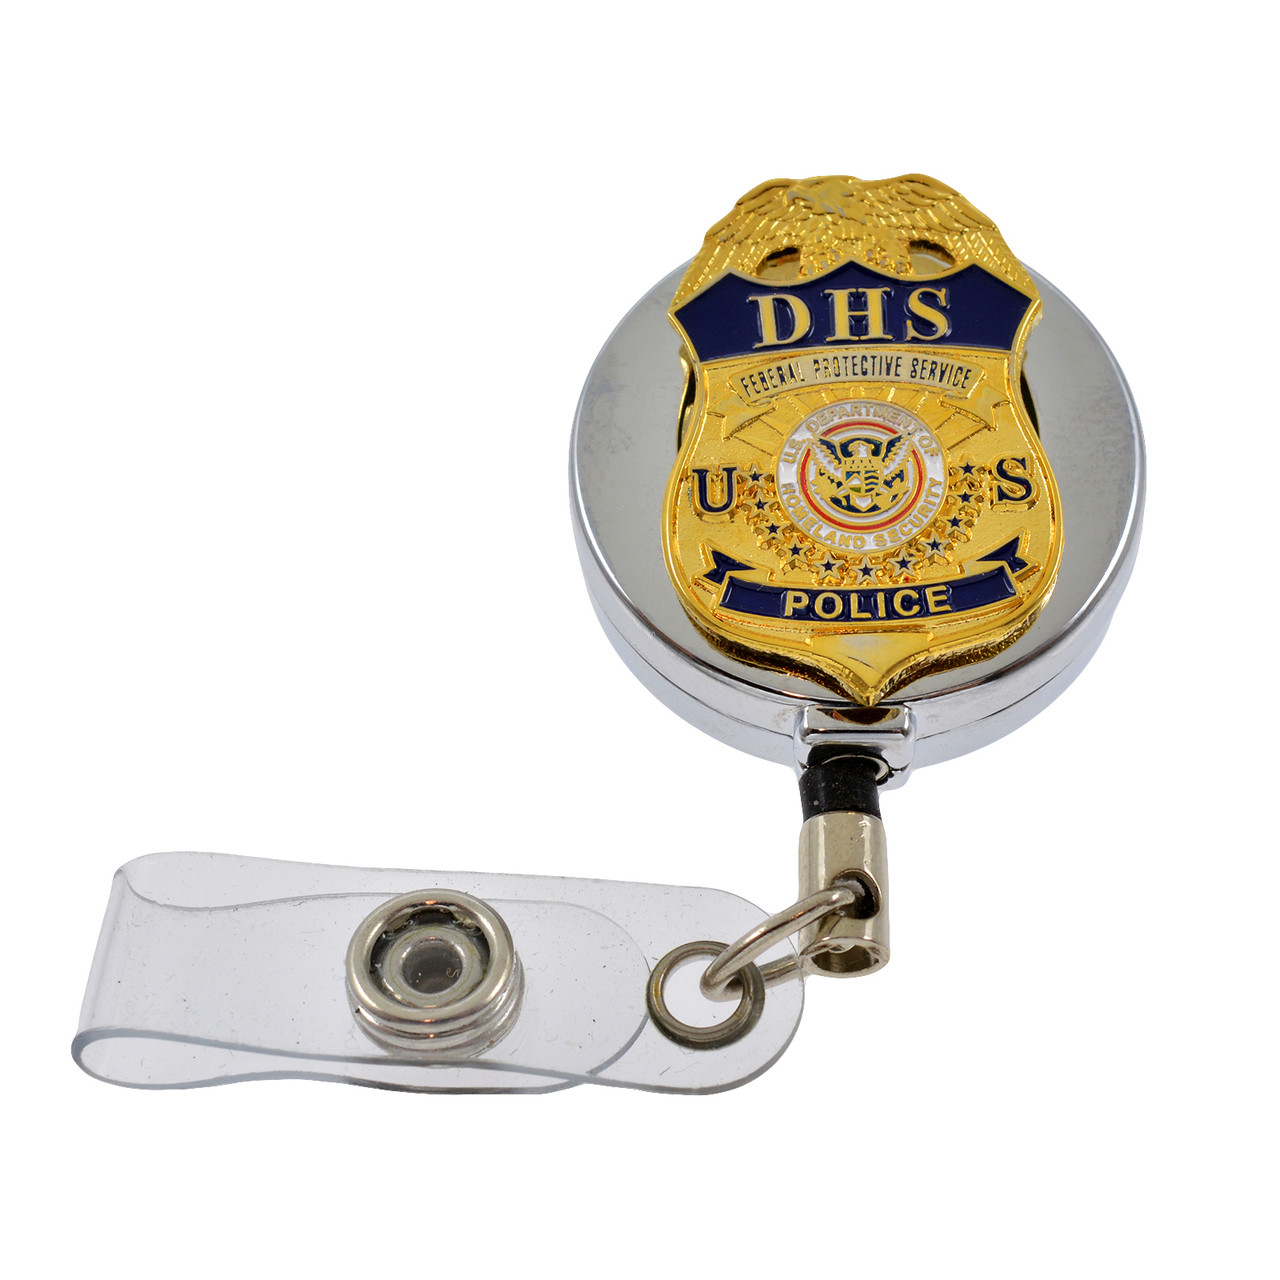 DHS FPS Police Mini Badge Retractable ID Holder Reel